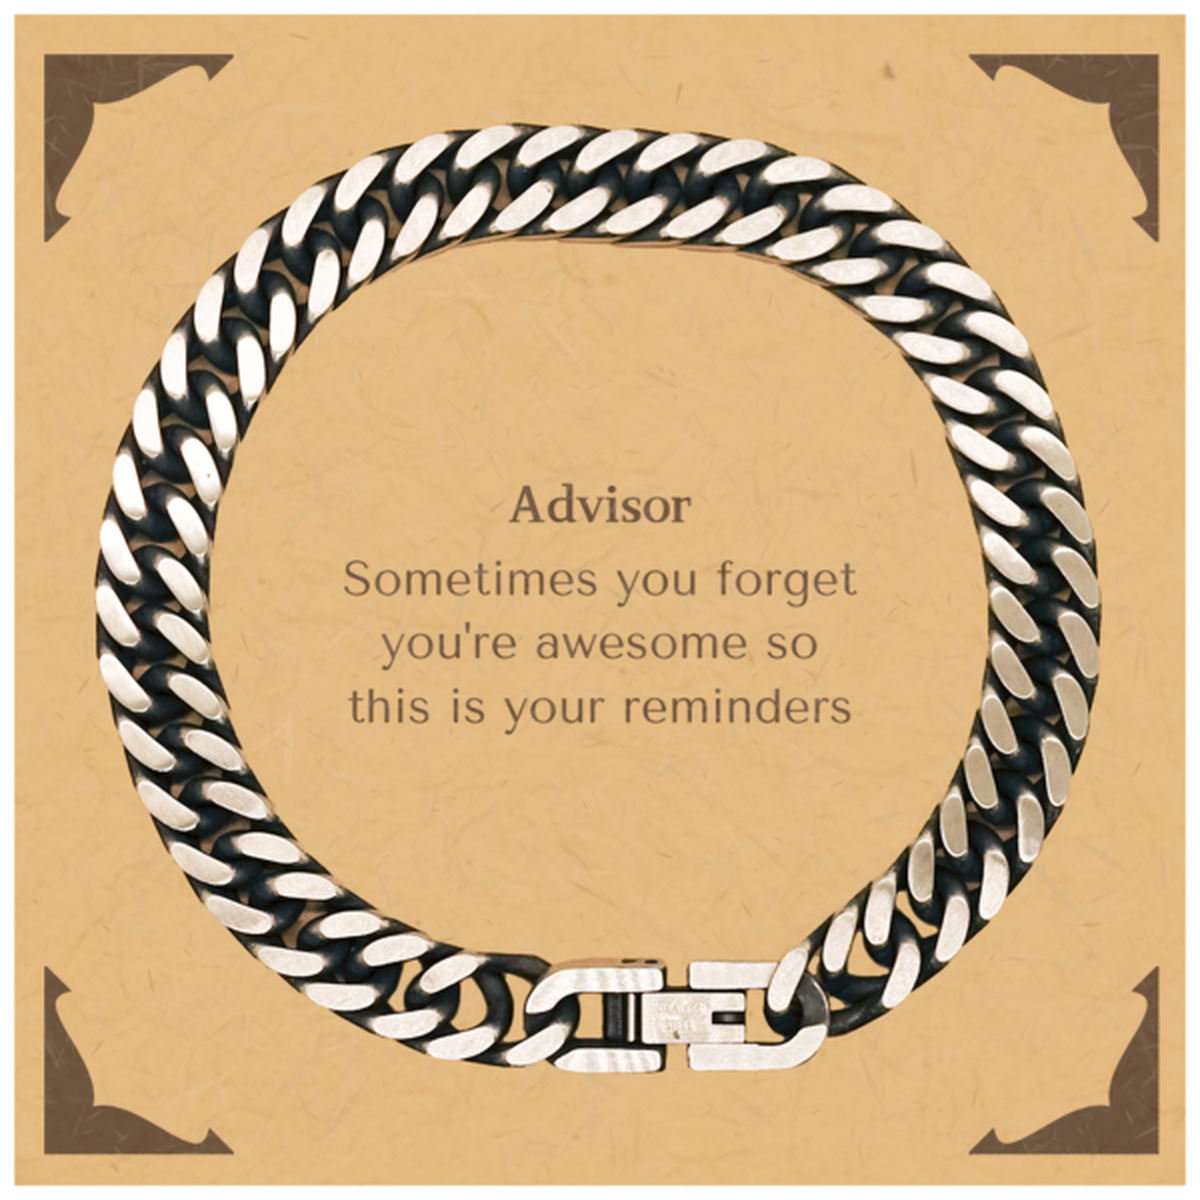 Sentimental Advisor Cuban Link Chain Bracelet, Advisor Sometimes you forget you're awesome so this is your reminders, Graduation Christmas Birthday Gifts for Advisor, Men, Women, Coworkers